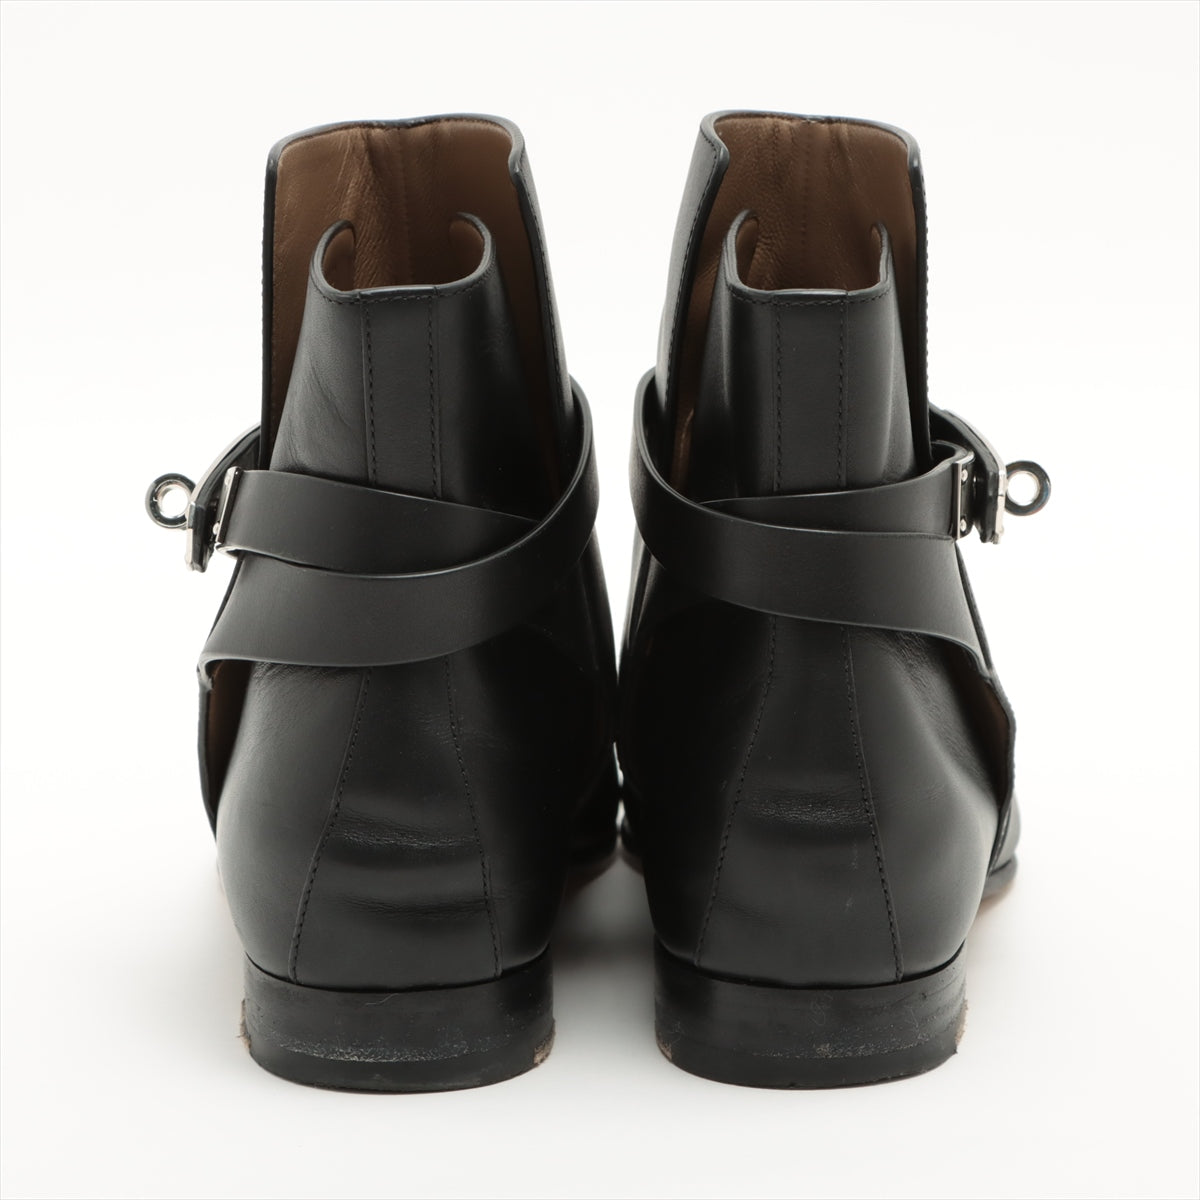 Hermès Neo Leather Short Boots 41 Ladies' Black CV162133Z2209 box There is a bag Kelly metal fittings